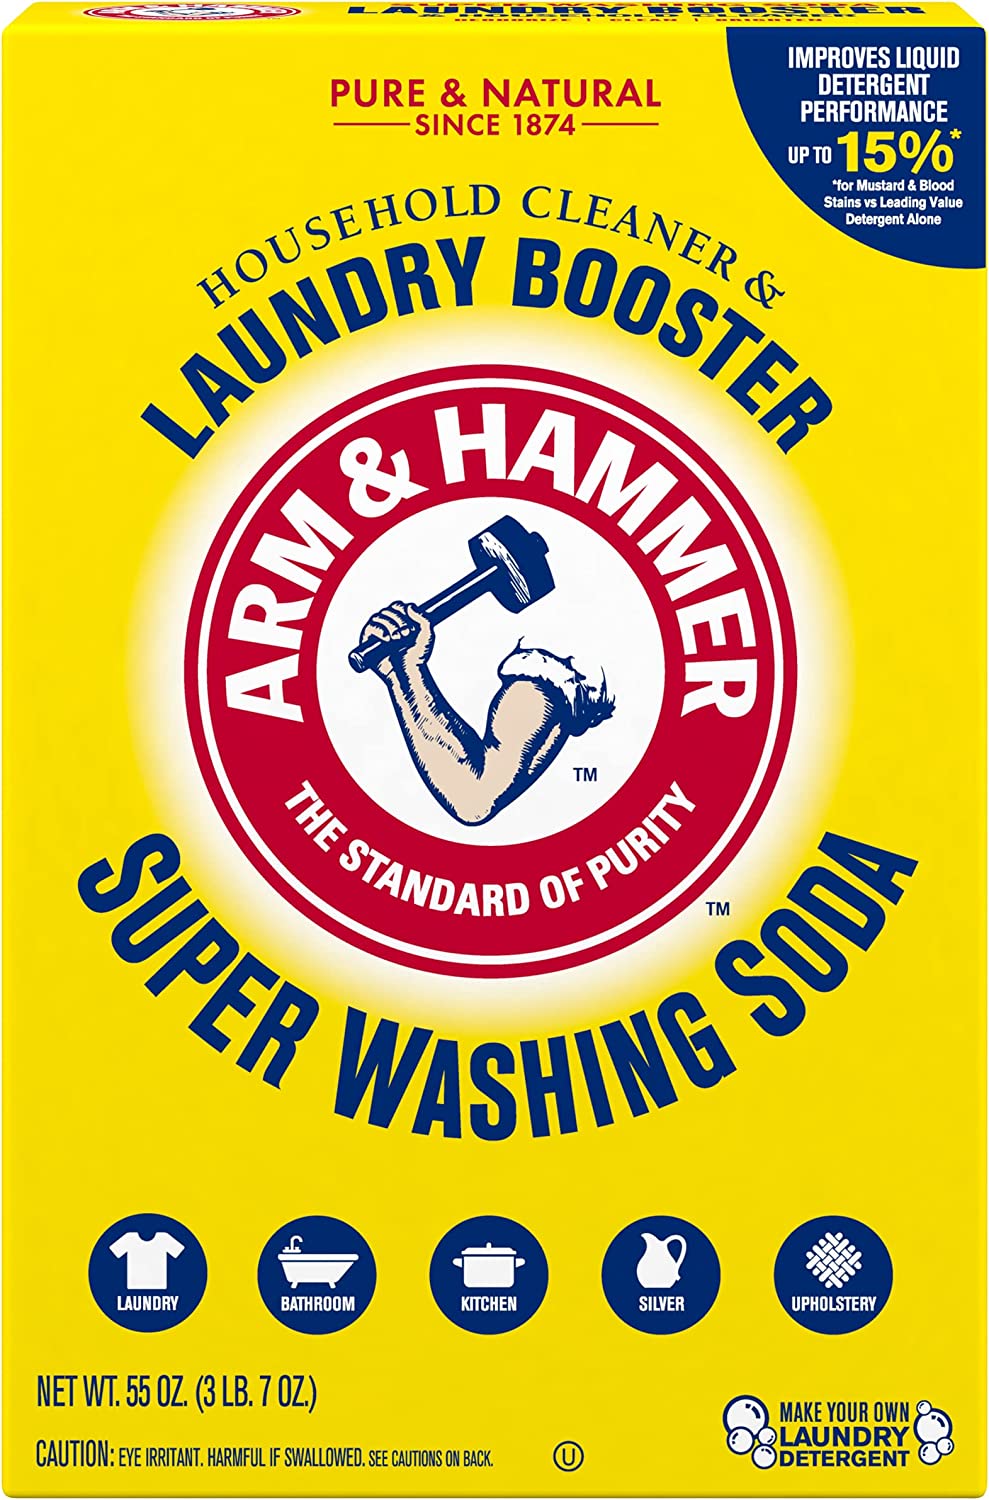 Arm & Hammer Super Washing Soda Detergent Booster & Household Cleaner, 55oz. - $4.52 at Amazon